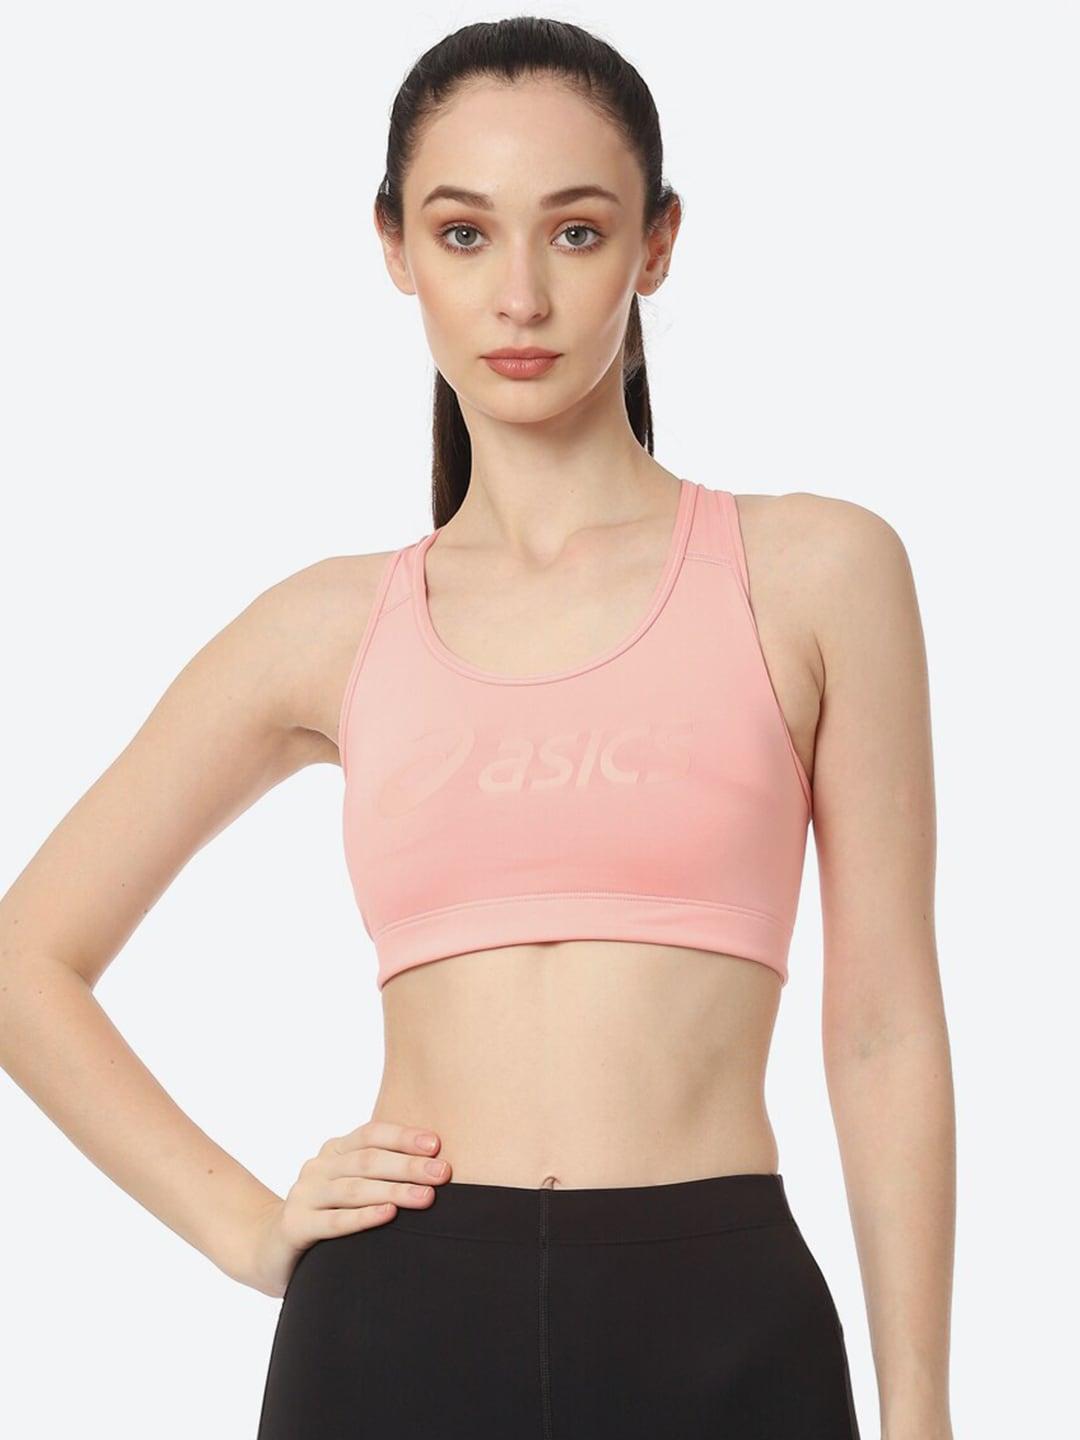 asics-pink-padded-non-wired-sports-bra